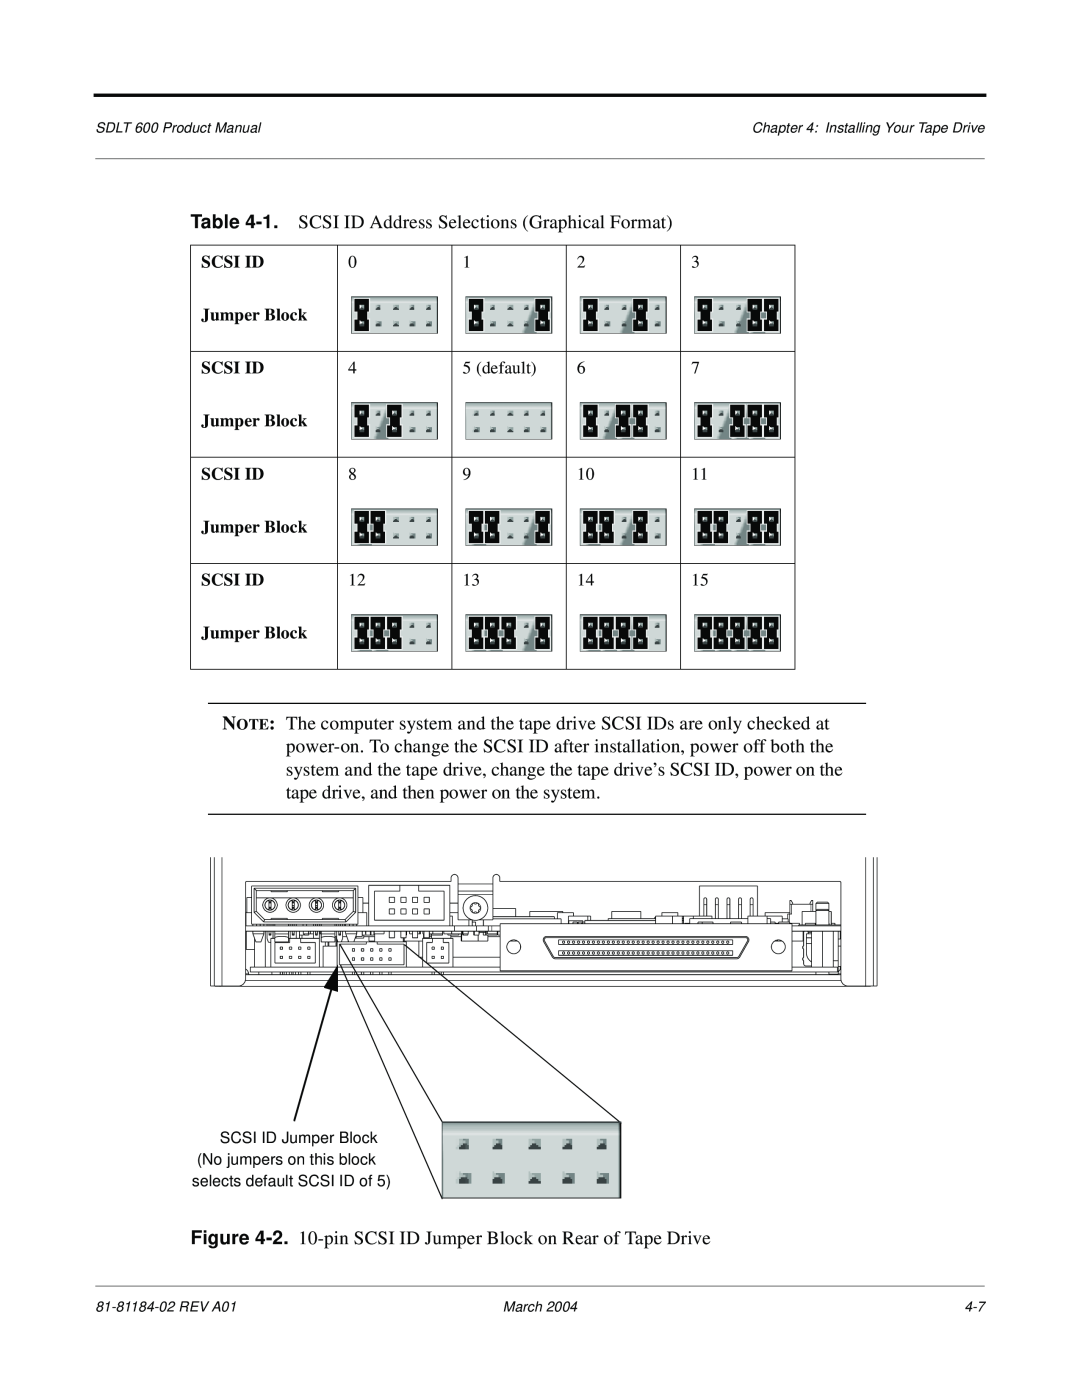 Tandberg Data 600 manual 1. SCSI ID Address Selections Graphical Format 